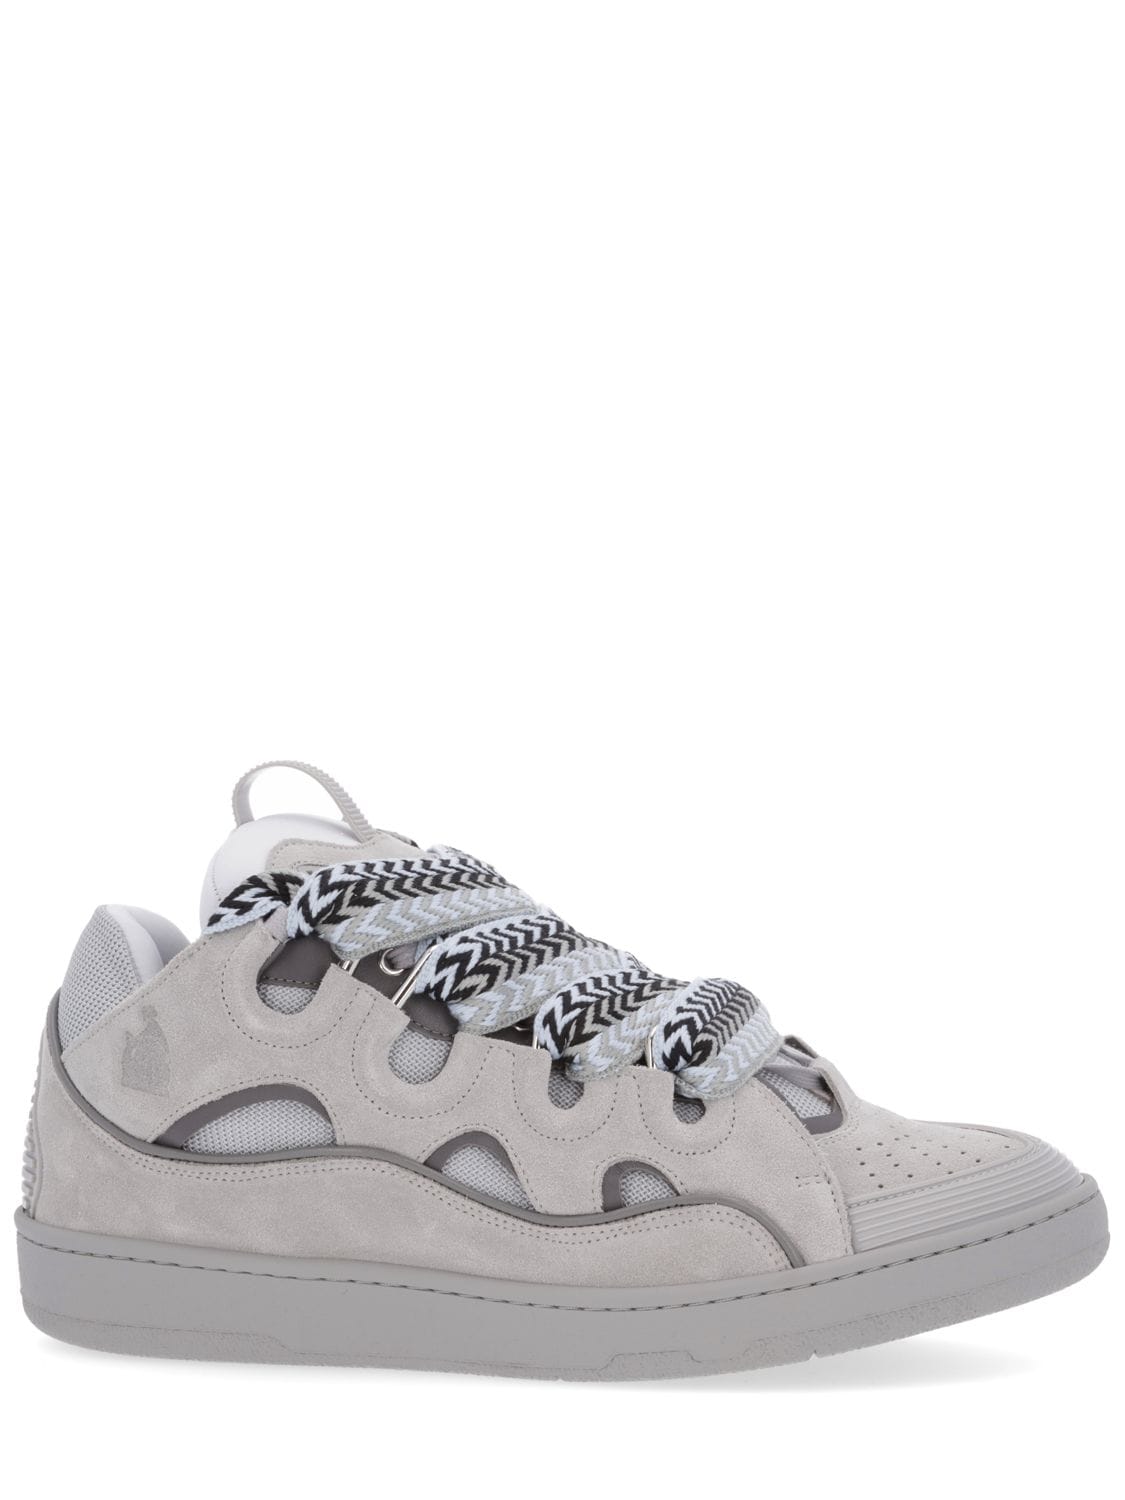 Lanvin Curb Leather Sneakers In Grey